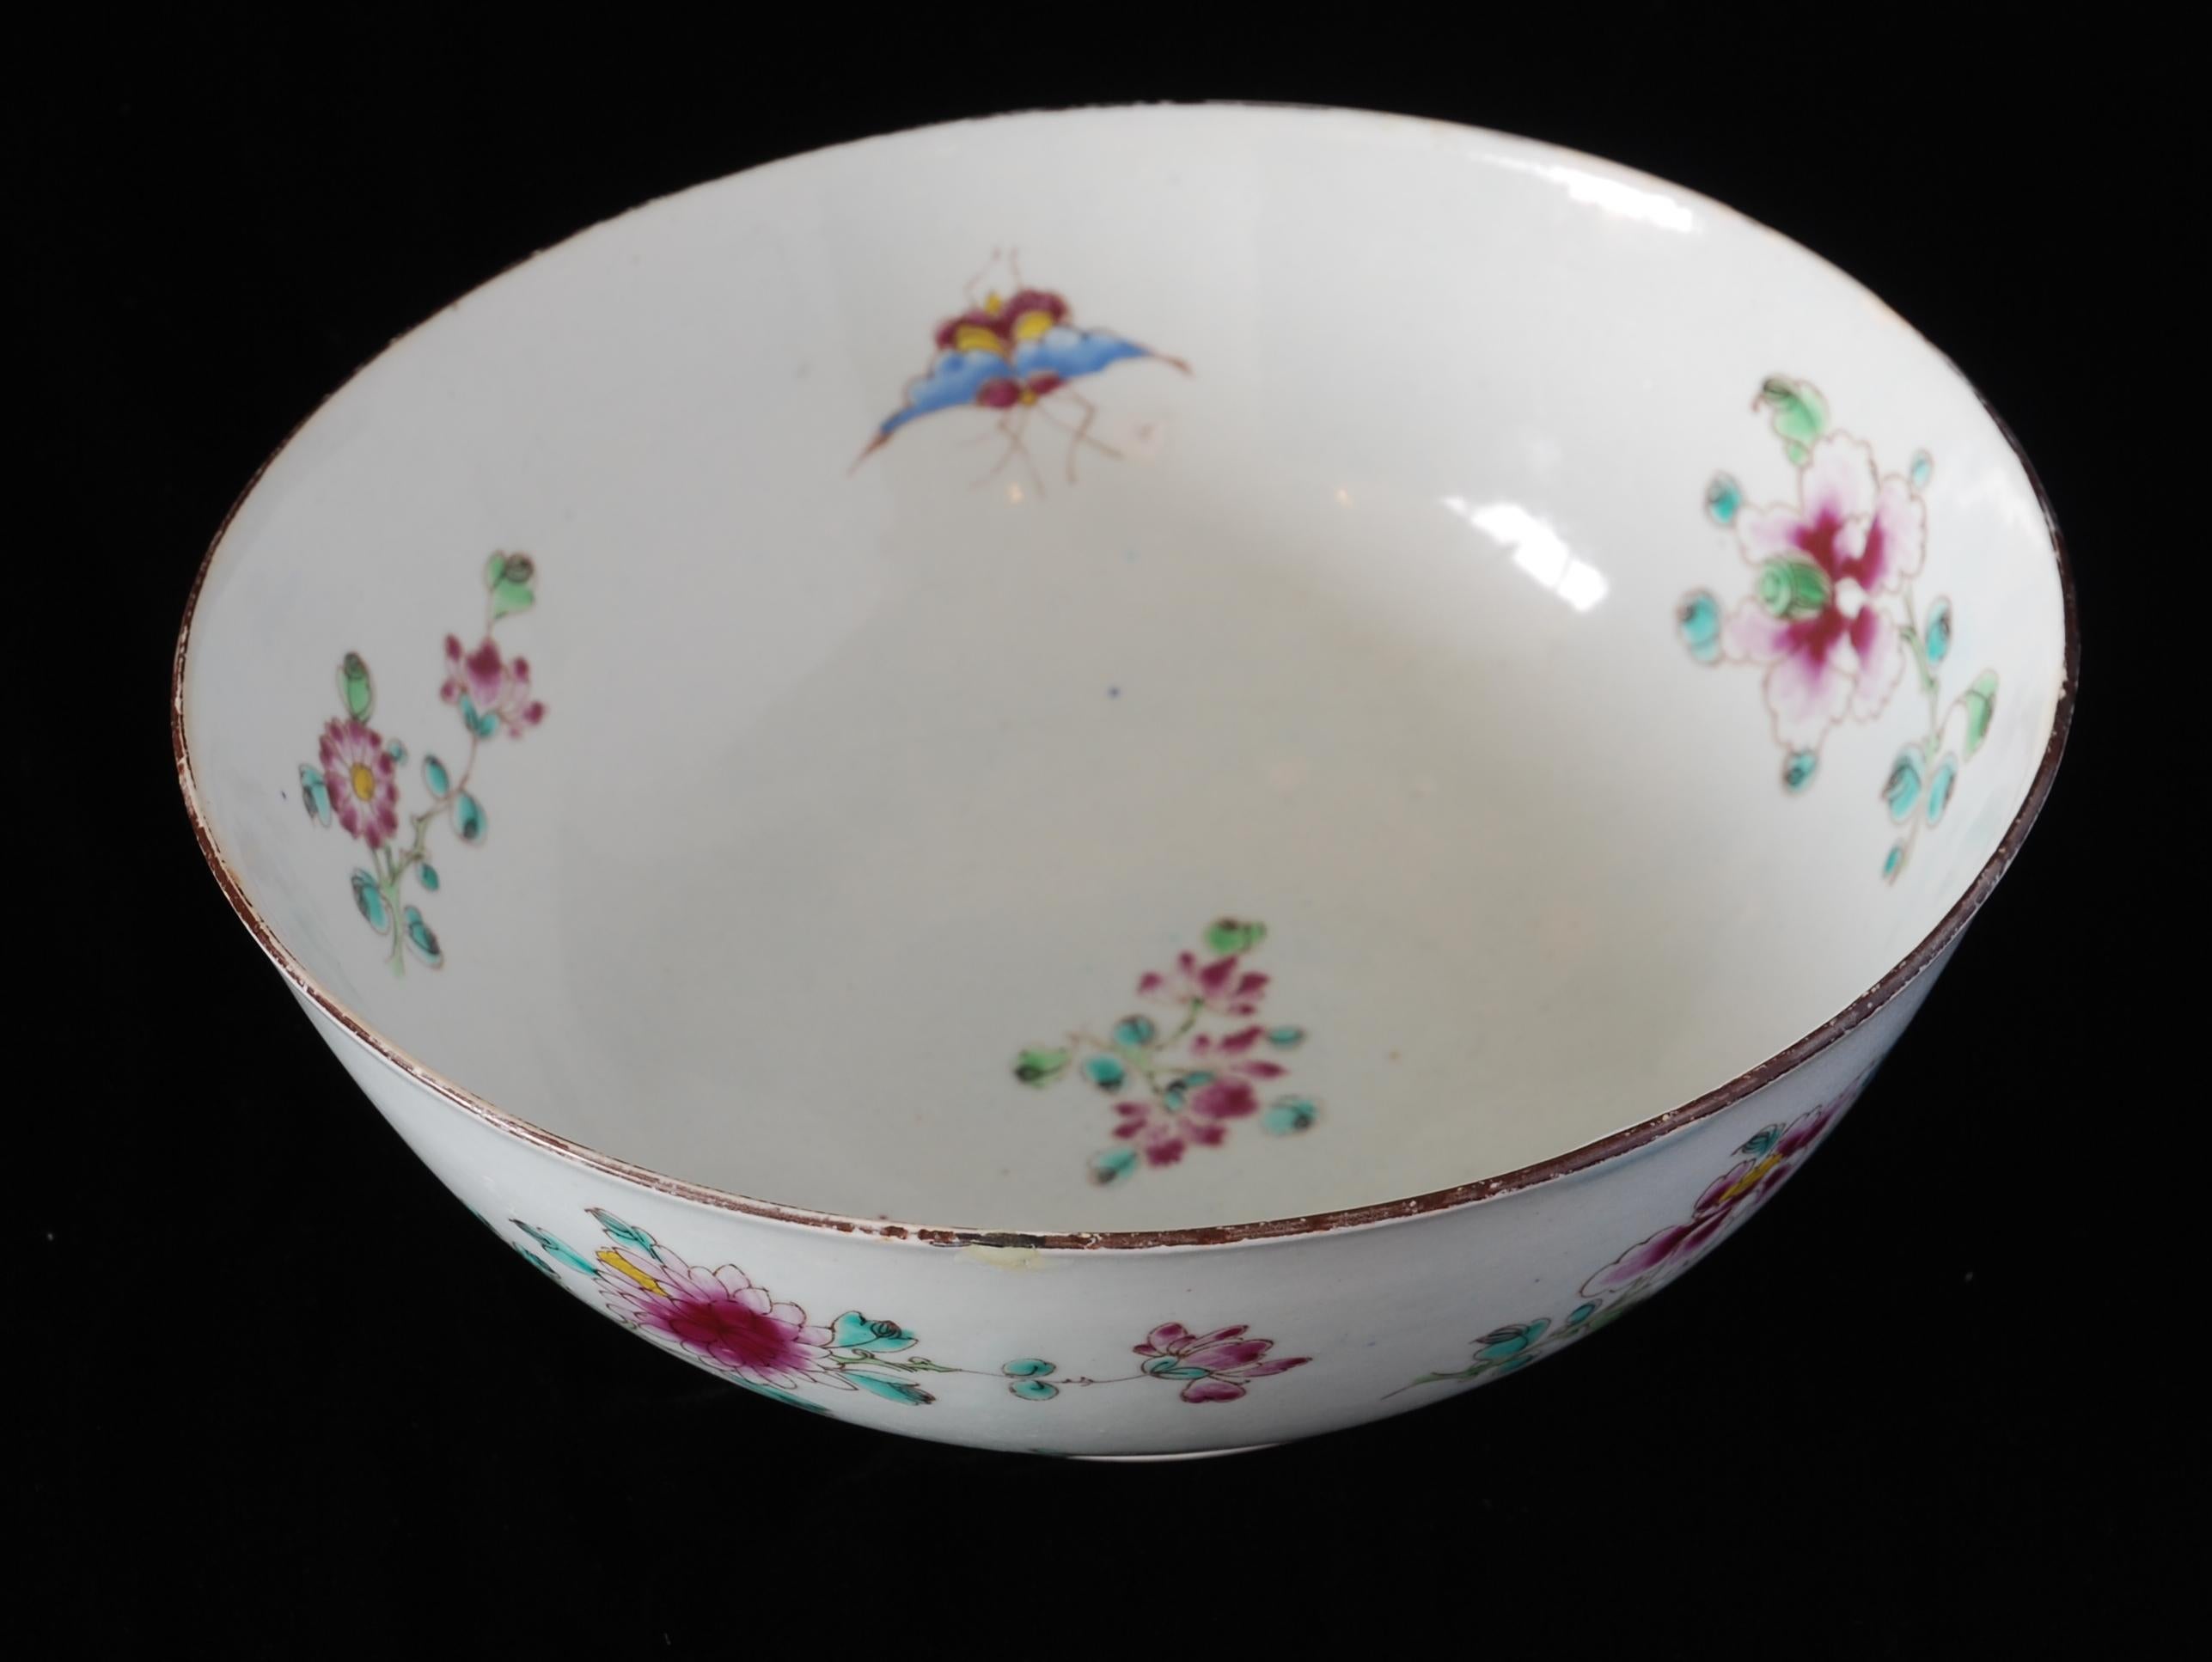 A rather splendid punch bowl from the Bow Porcelain Factory, enameled with flowers and insects in the Famille Rose style. A good size, at almost nine inches in diameter.

Famille Rose is a type of Chinese porcelain decoration that was first